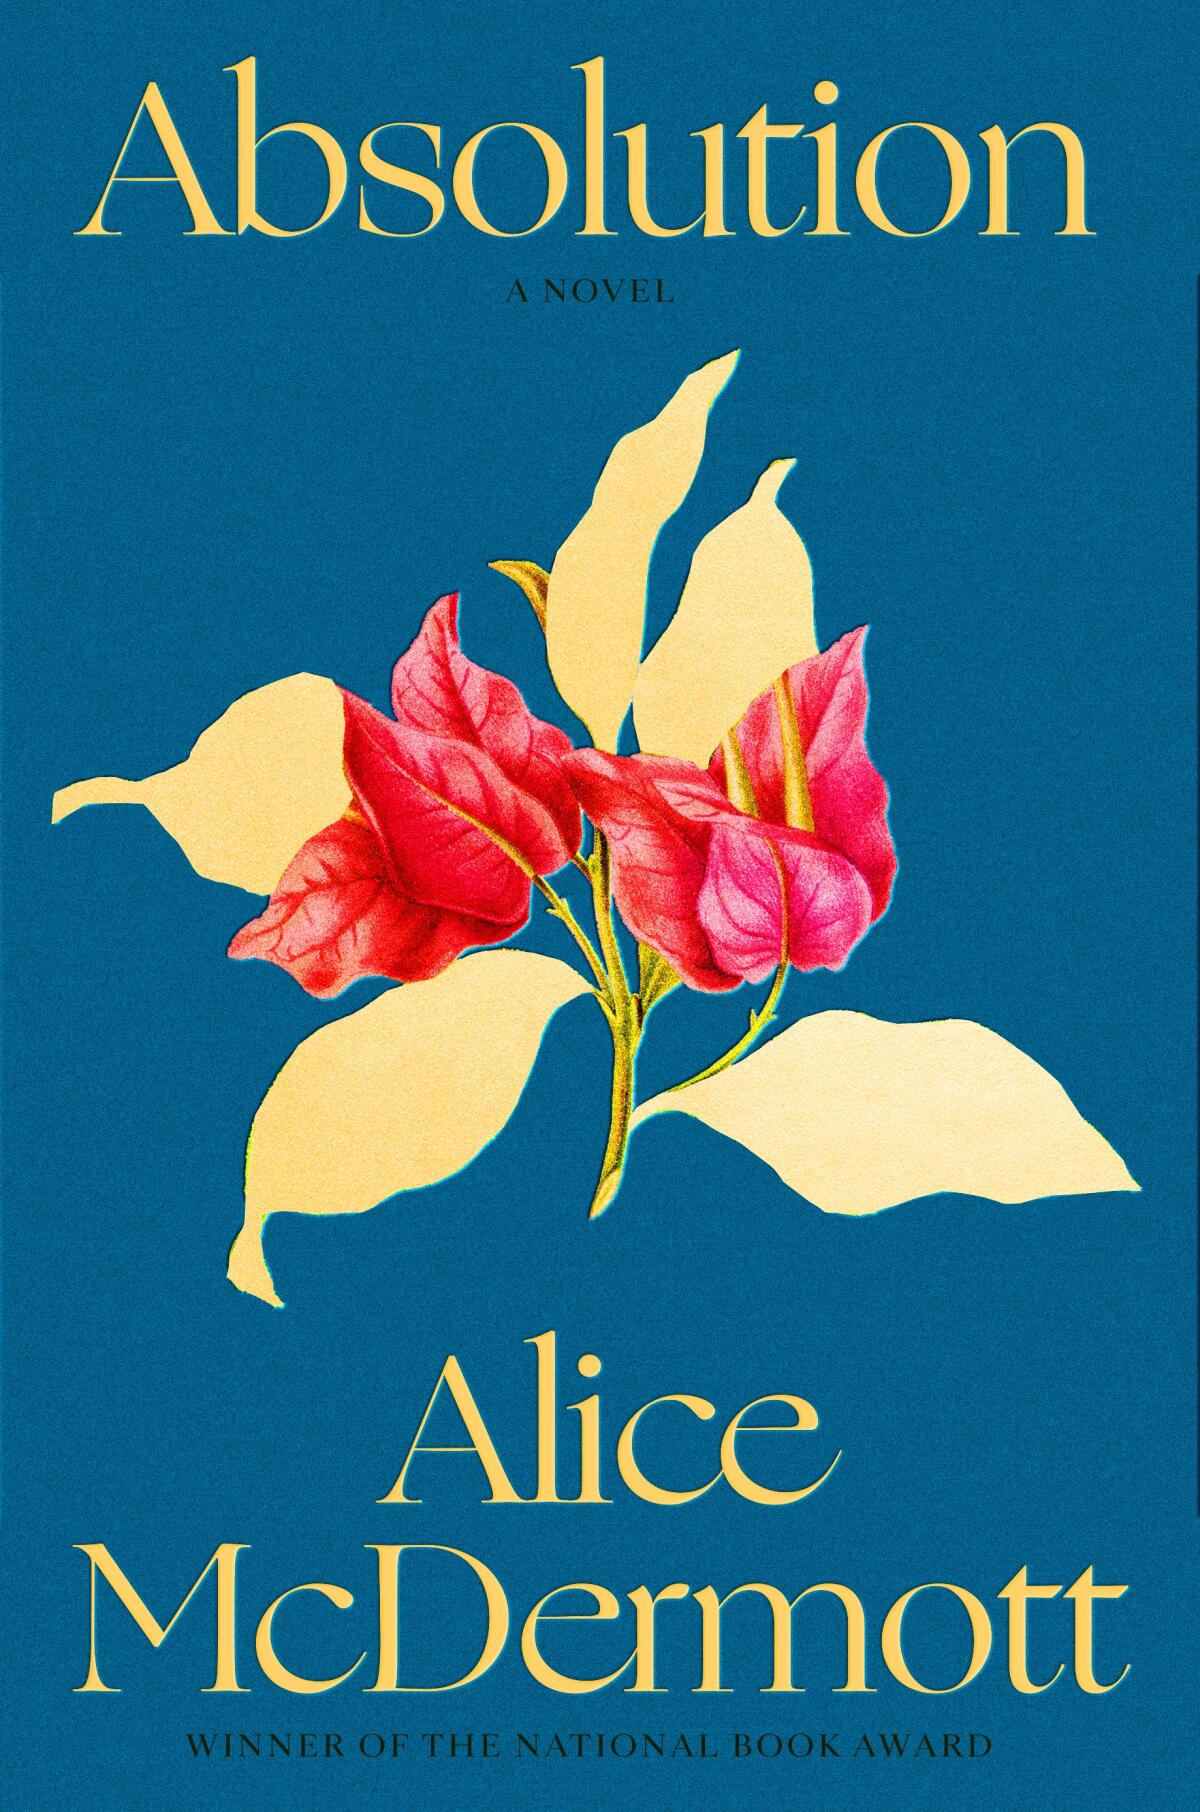 Book cover of "Absolution" by Alice McDermott